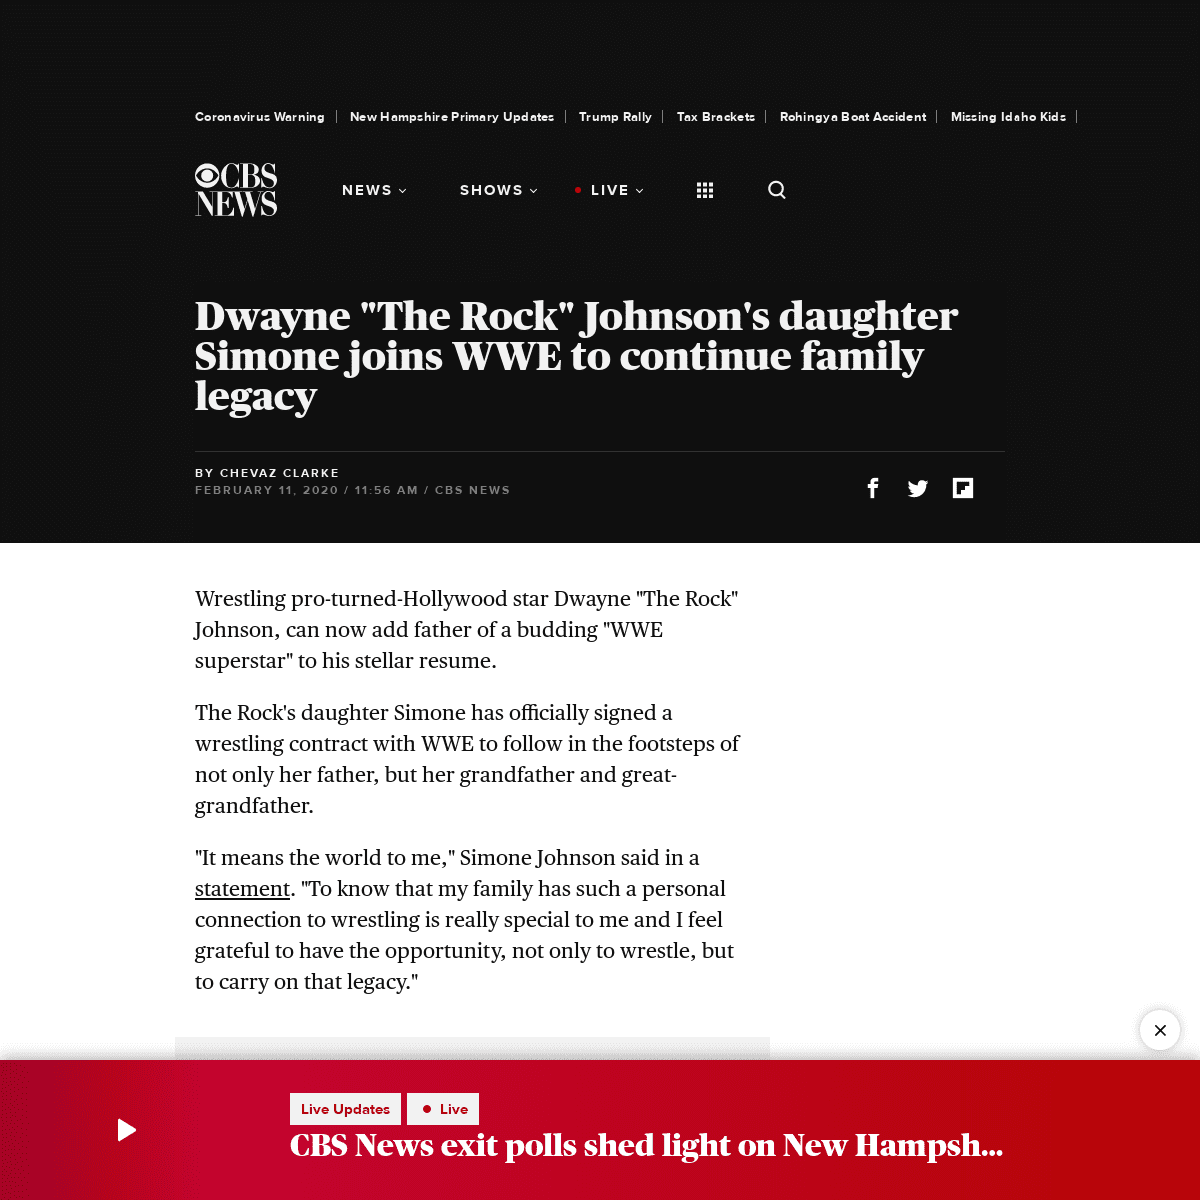 A complete backup of www.cbsnews.com/news/the-rock-dwayne-johnson-daughter-simone-joins-wwe-family-legacy-fourth-generation-rock